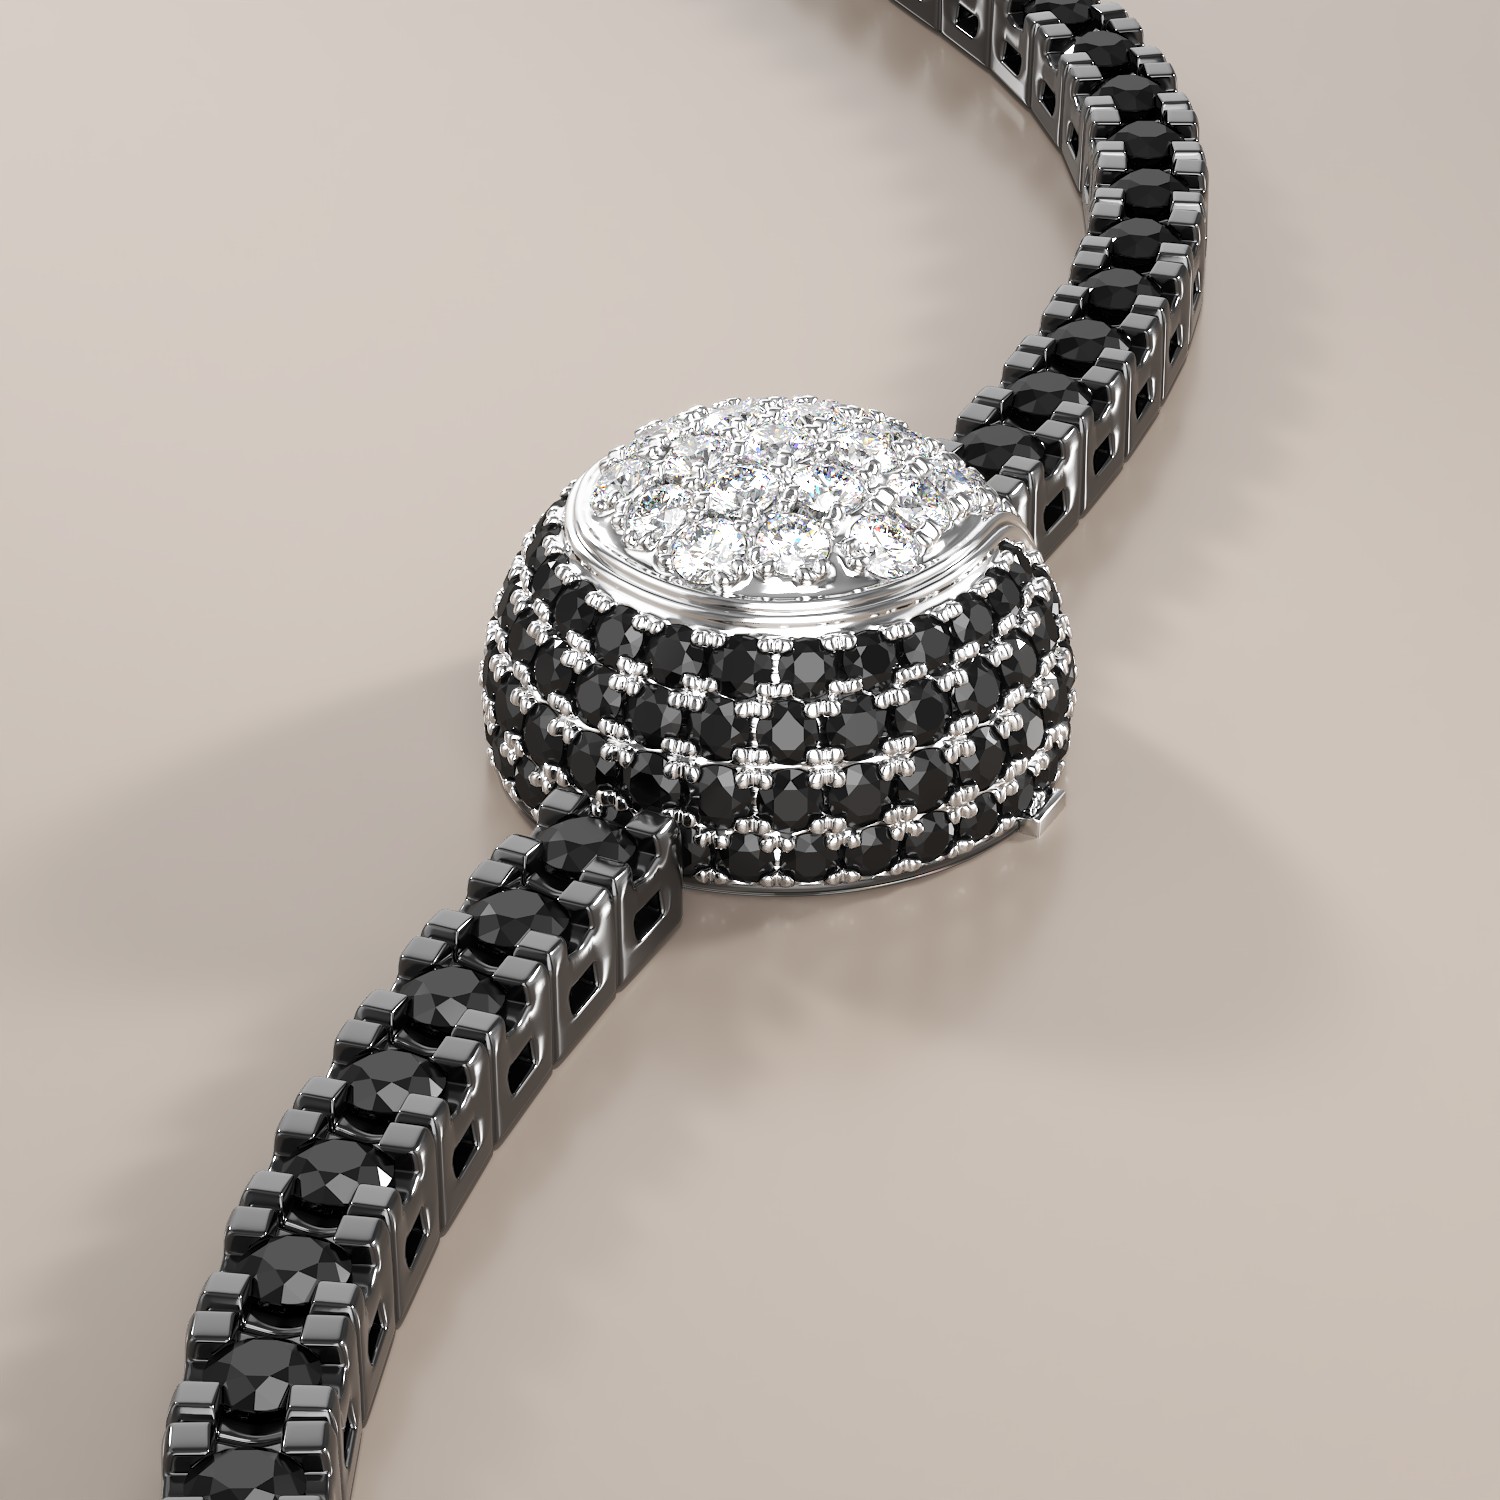 Victory tennis bracelet with 2.02ct black and clear diamonds